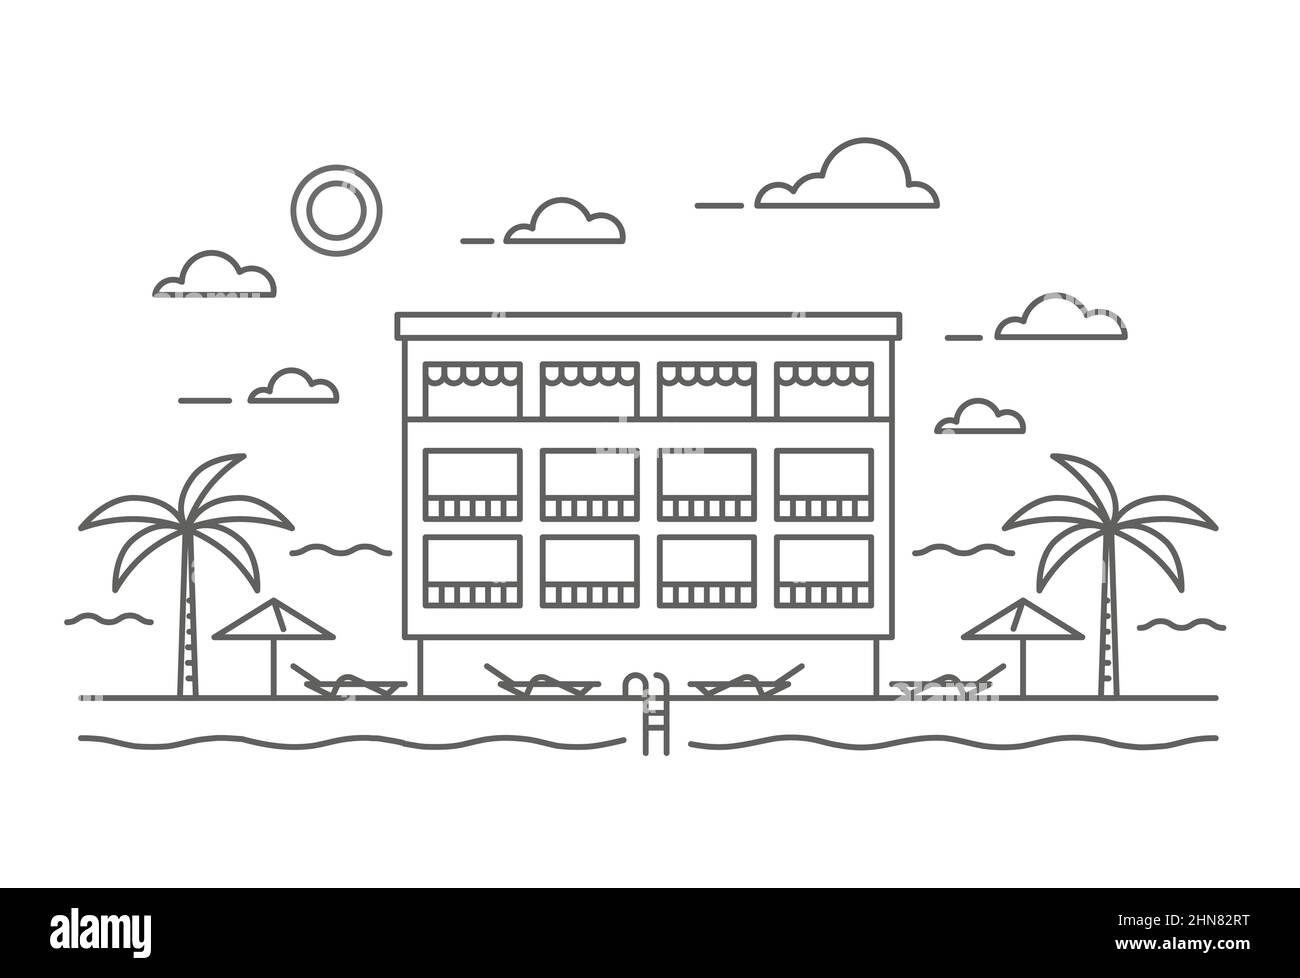 Hotel near the sea with water pool and palms. Outline resort and spa building. Vector illustration. Stock Vector